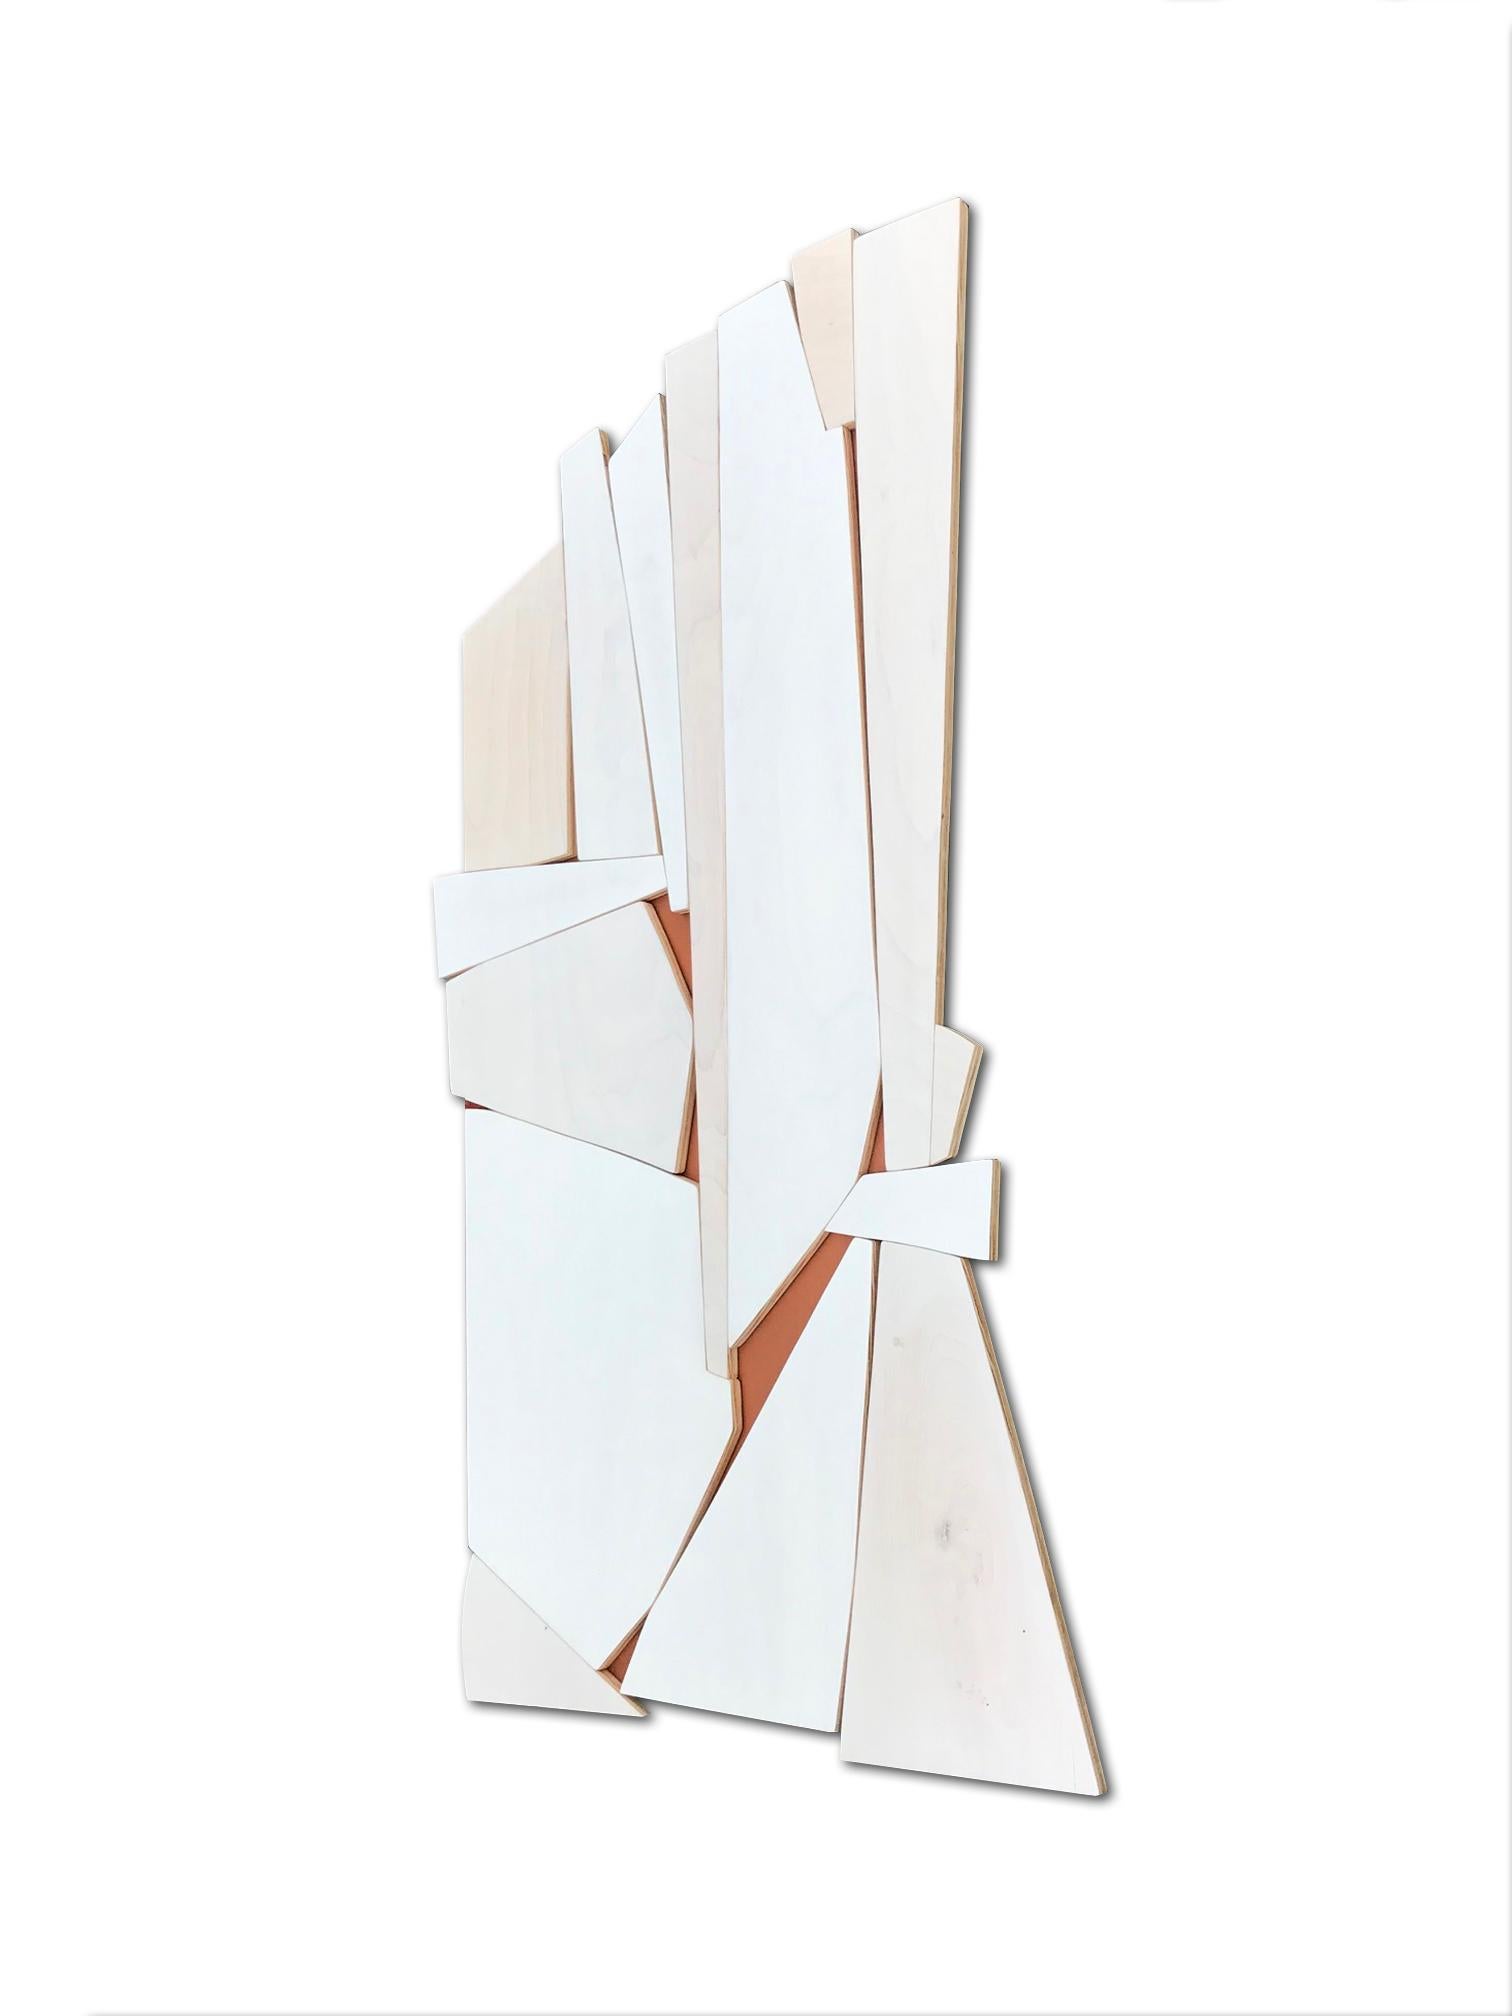 
Cathedral is a mixed media wall sculpture. Made from enamel washes on birch, MDF and copper spray enamel. Finished with a hand waxed process.

Cathedral takes on the abstract form of a soaring building. Perhaps a church spire or other tall building